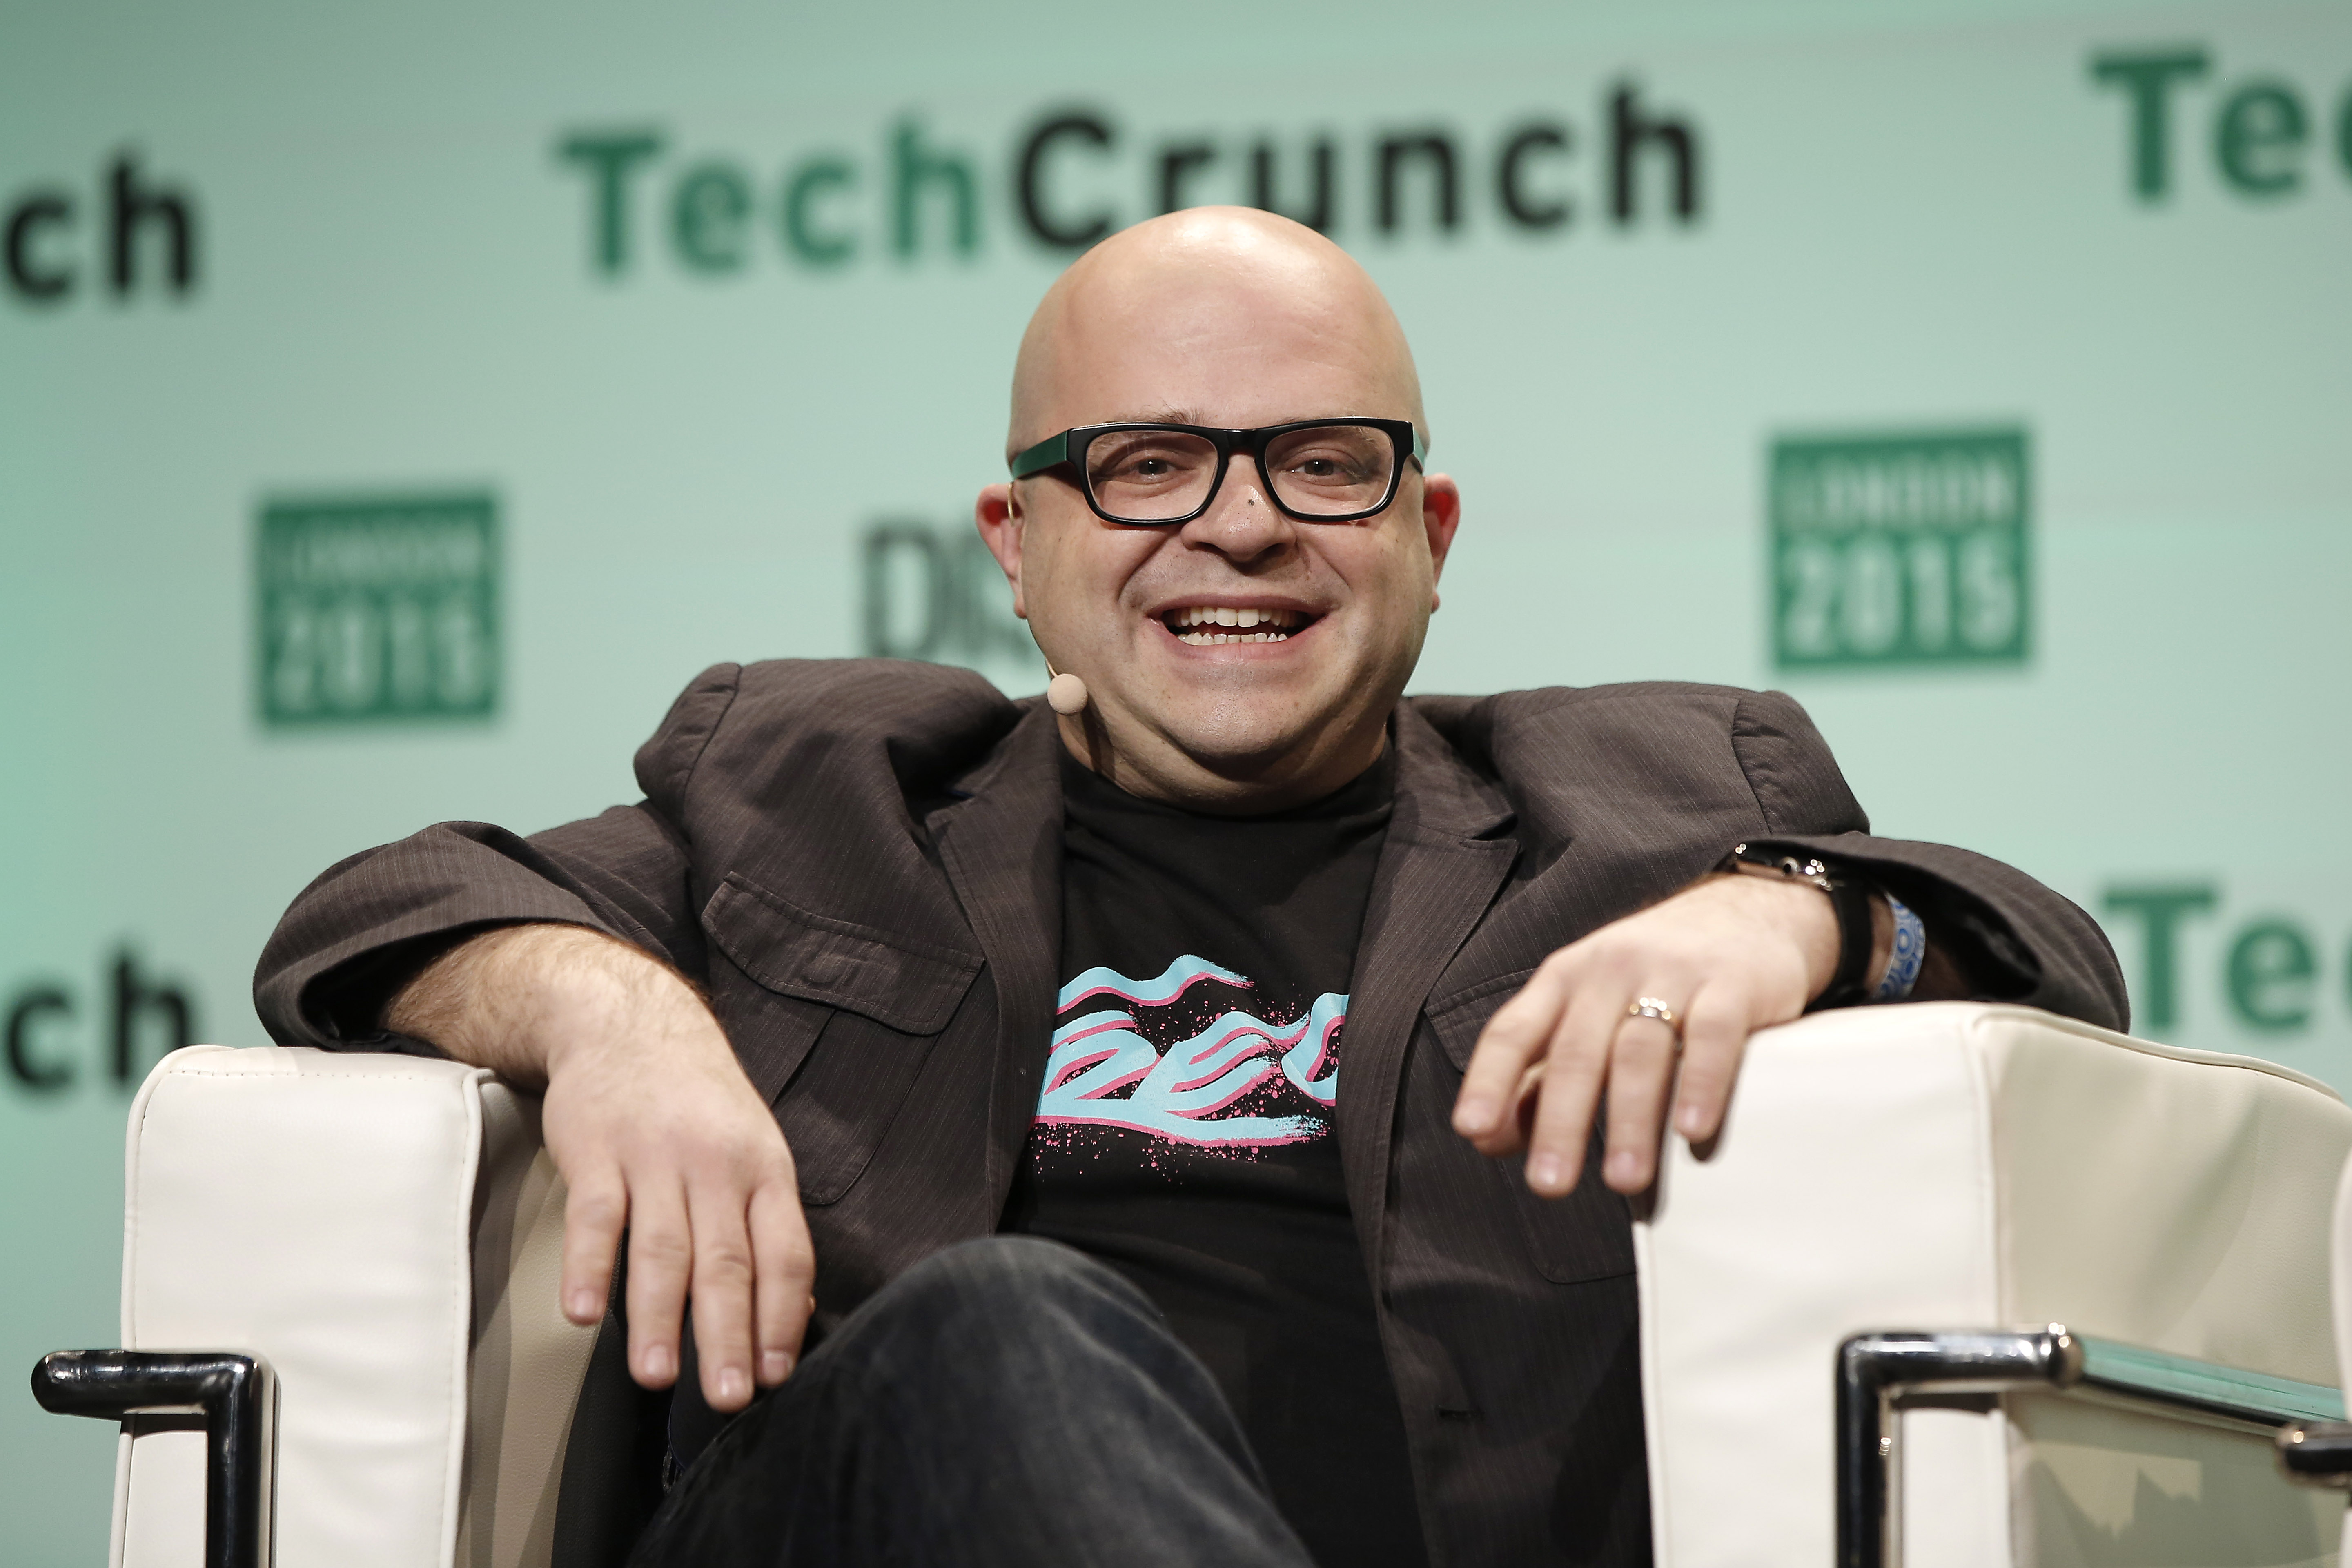 LONDON, ENGLAND - DECEMBER 08: Co-Founder & CEO at Twilio Inc. Jeff Lawson during TechCrunch Disrupt London 2015 - Day 2 at Copper Box Arena on December 8, 2015 in London, England. (Photo by John Phillips/Getty Images for TechCrunch) *** Local Caption *** Jeff Lawson